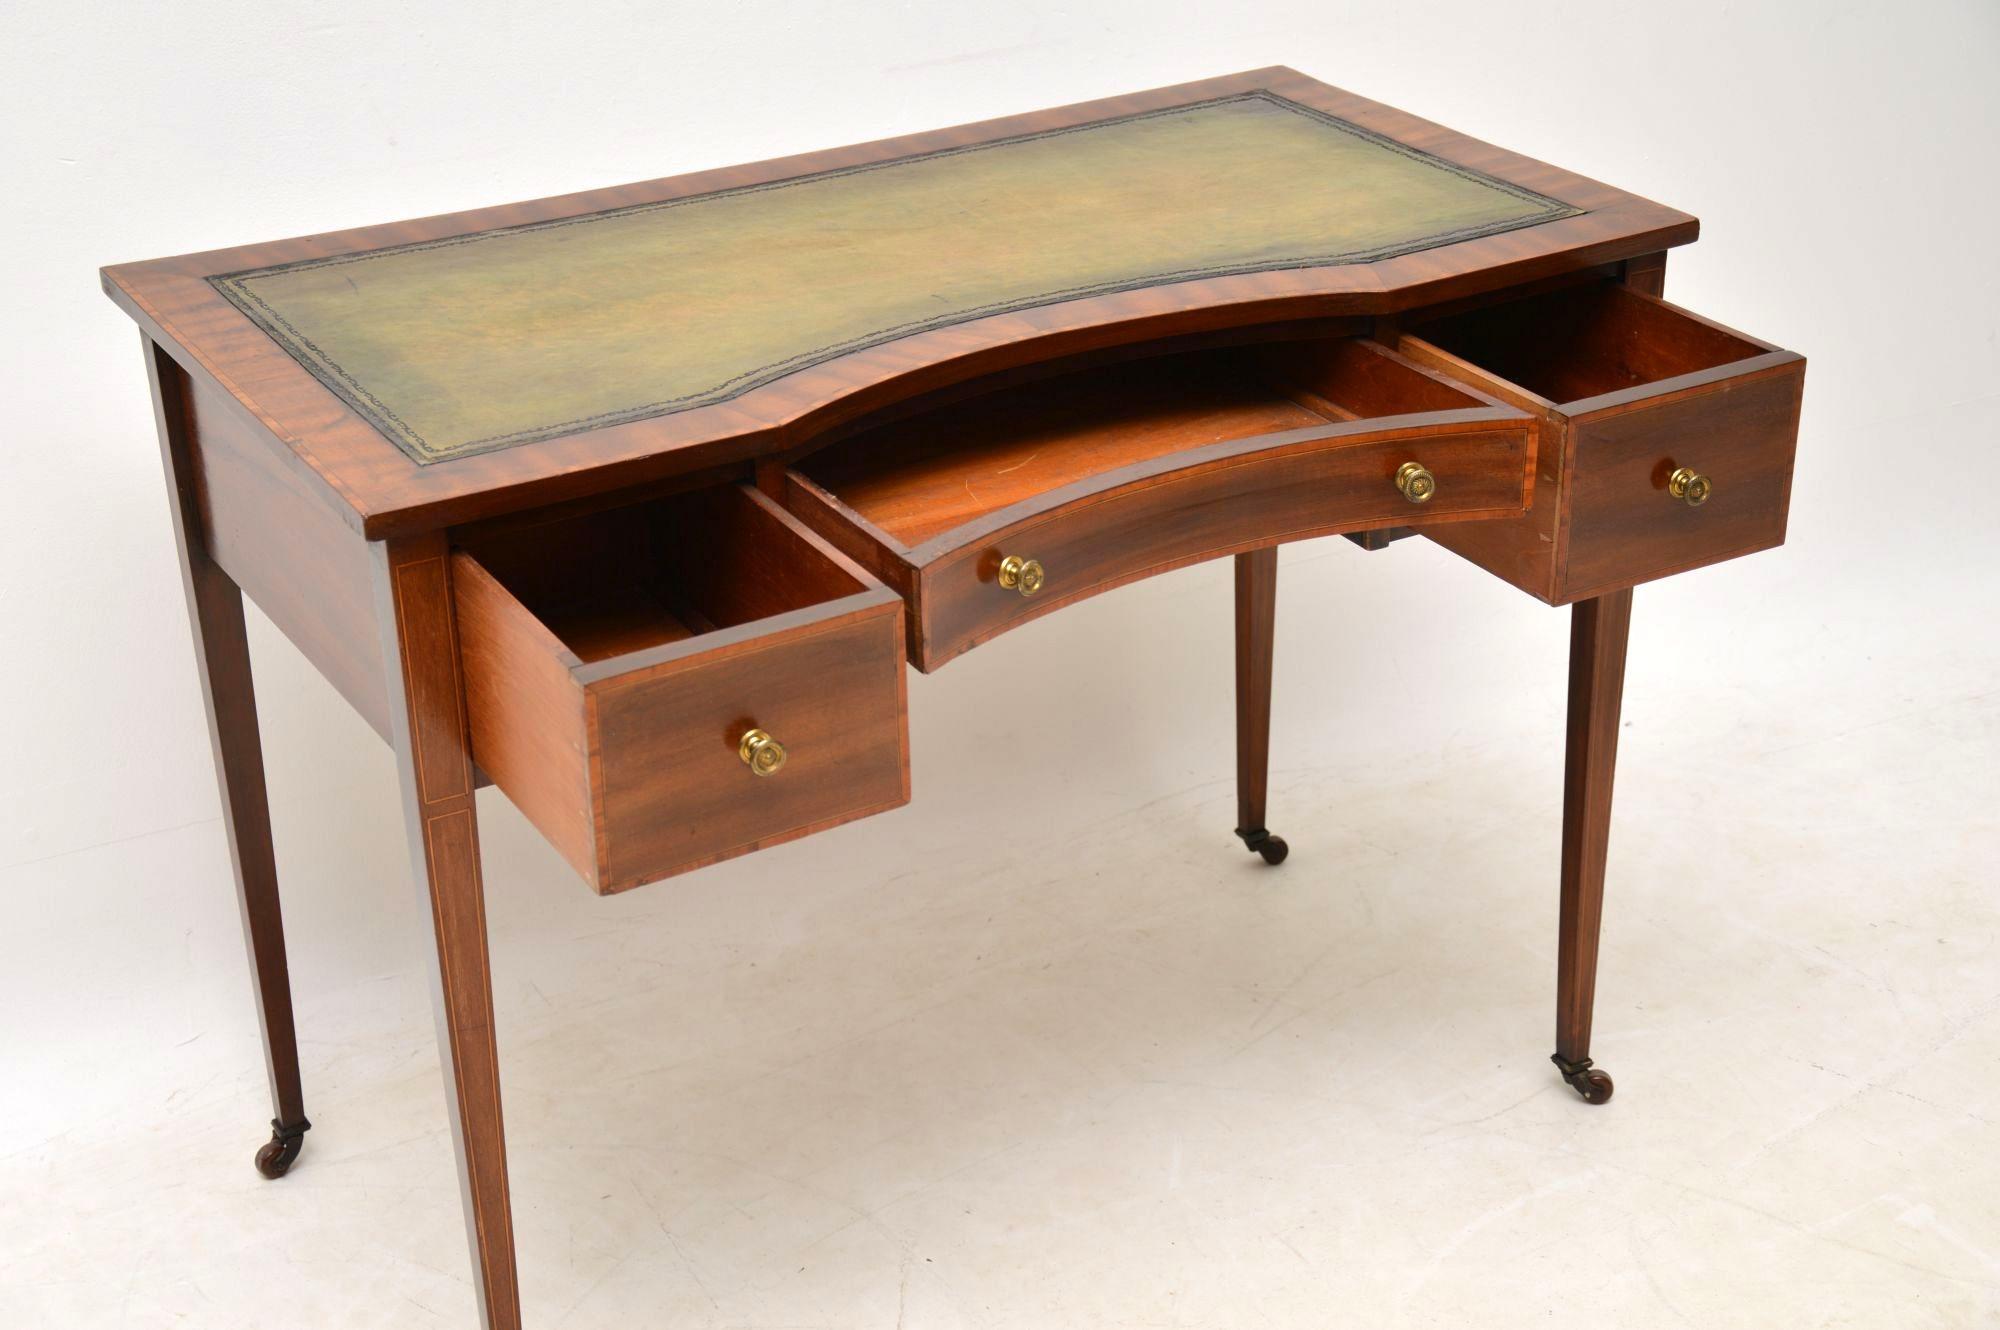 Early 20th Century Antique Edwardian Inlaid Mahogany Writing Table or Desk